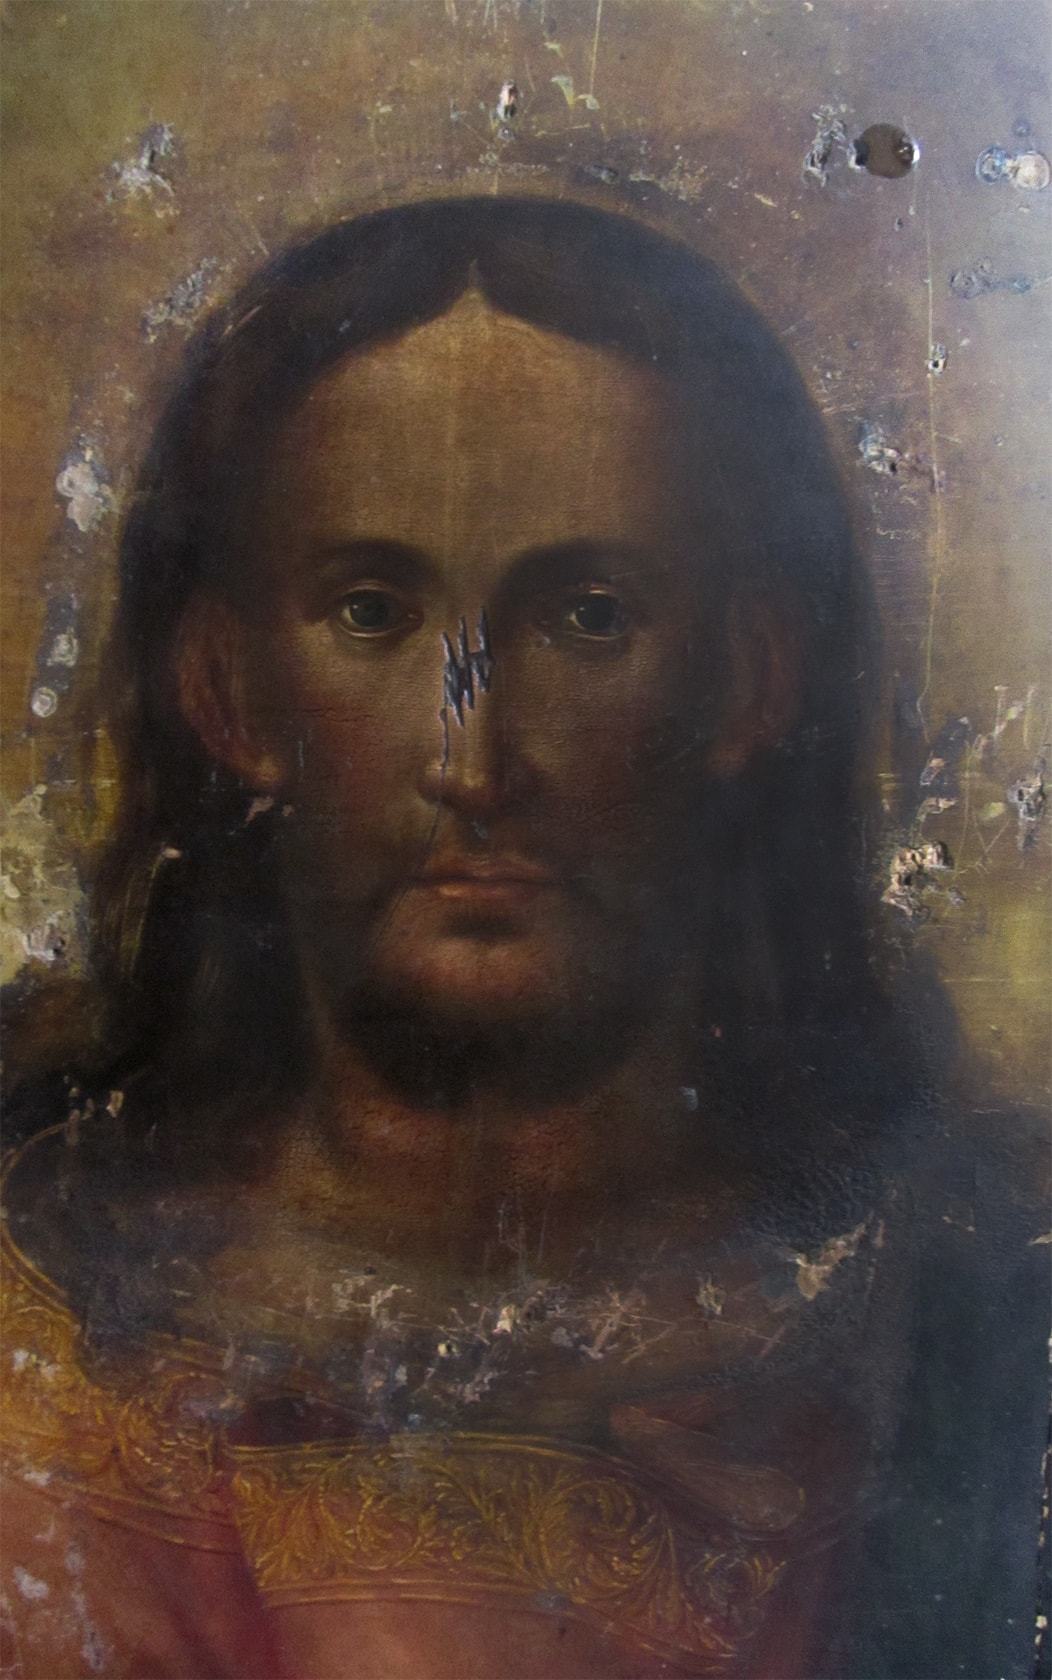 restoration, restoration of icons, restoration of icons stages, Icon of Christ the Pantocrator, early 20th century.